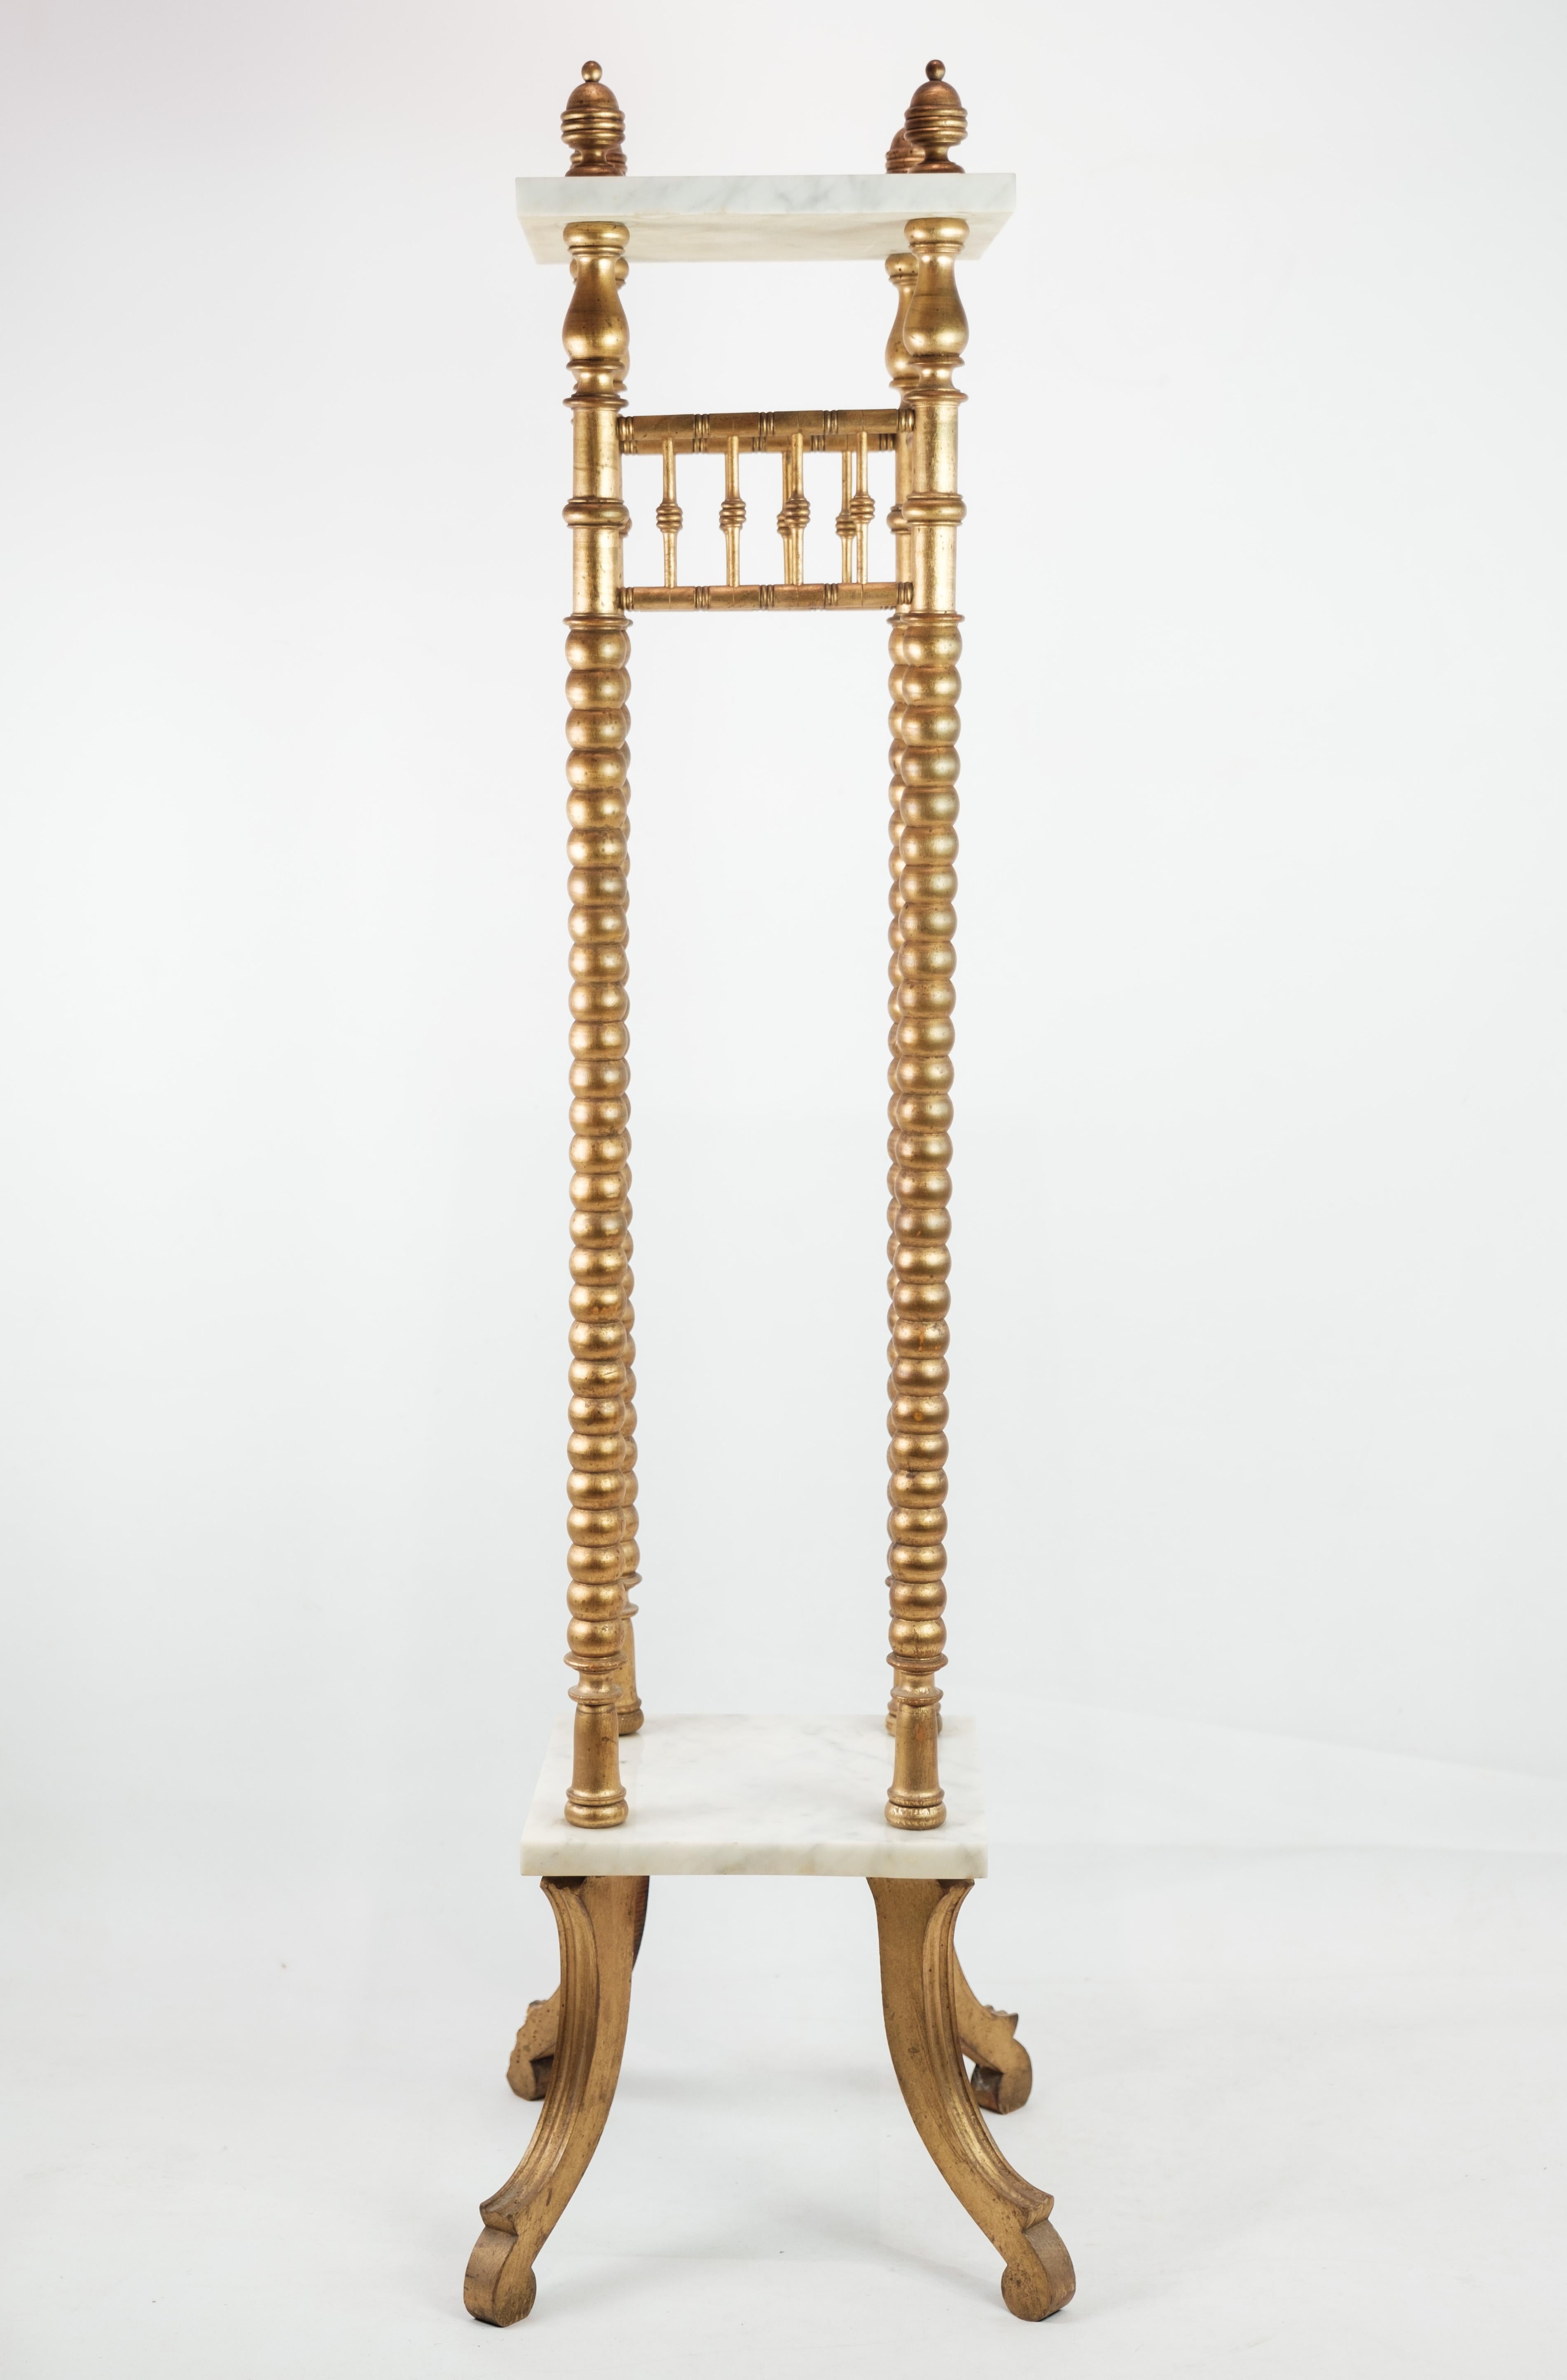 This elegant flowers stand from the 1930s exudes opulence and sophistication with its gilded columns and luxurious marble slabs. Crafted with exquisite attention to detail, it adds a touch of timeless beauty to any space.

The gilded columns lend an